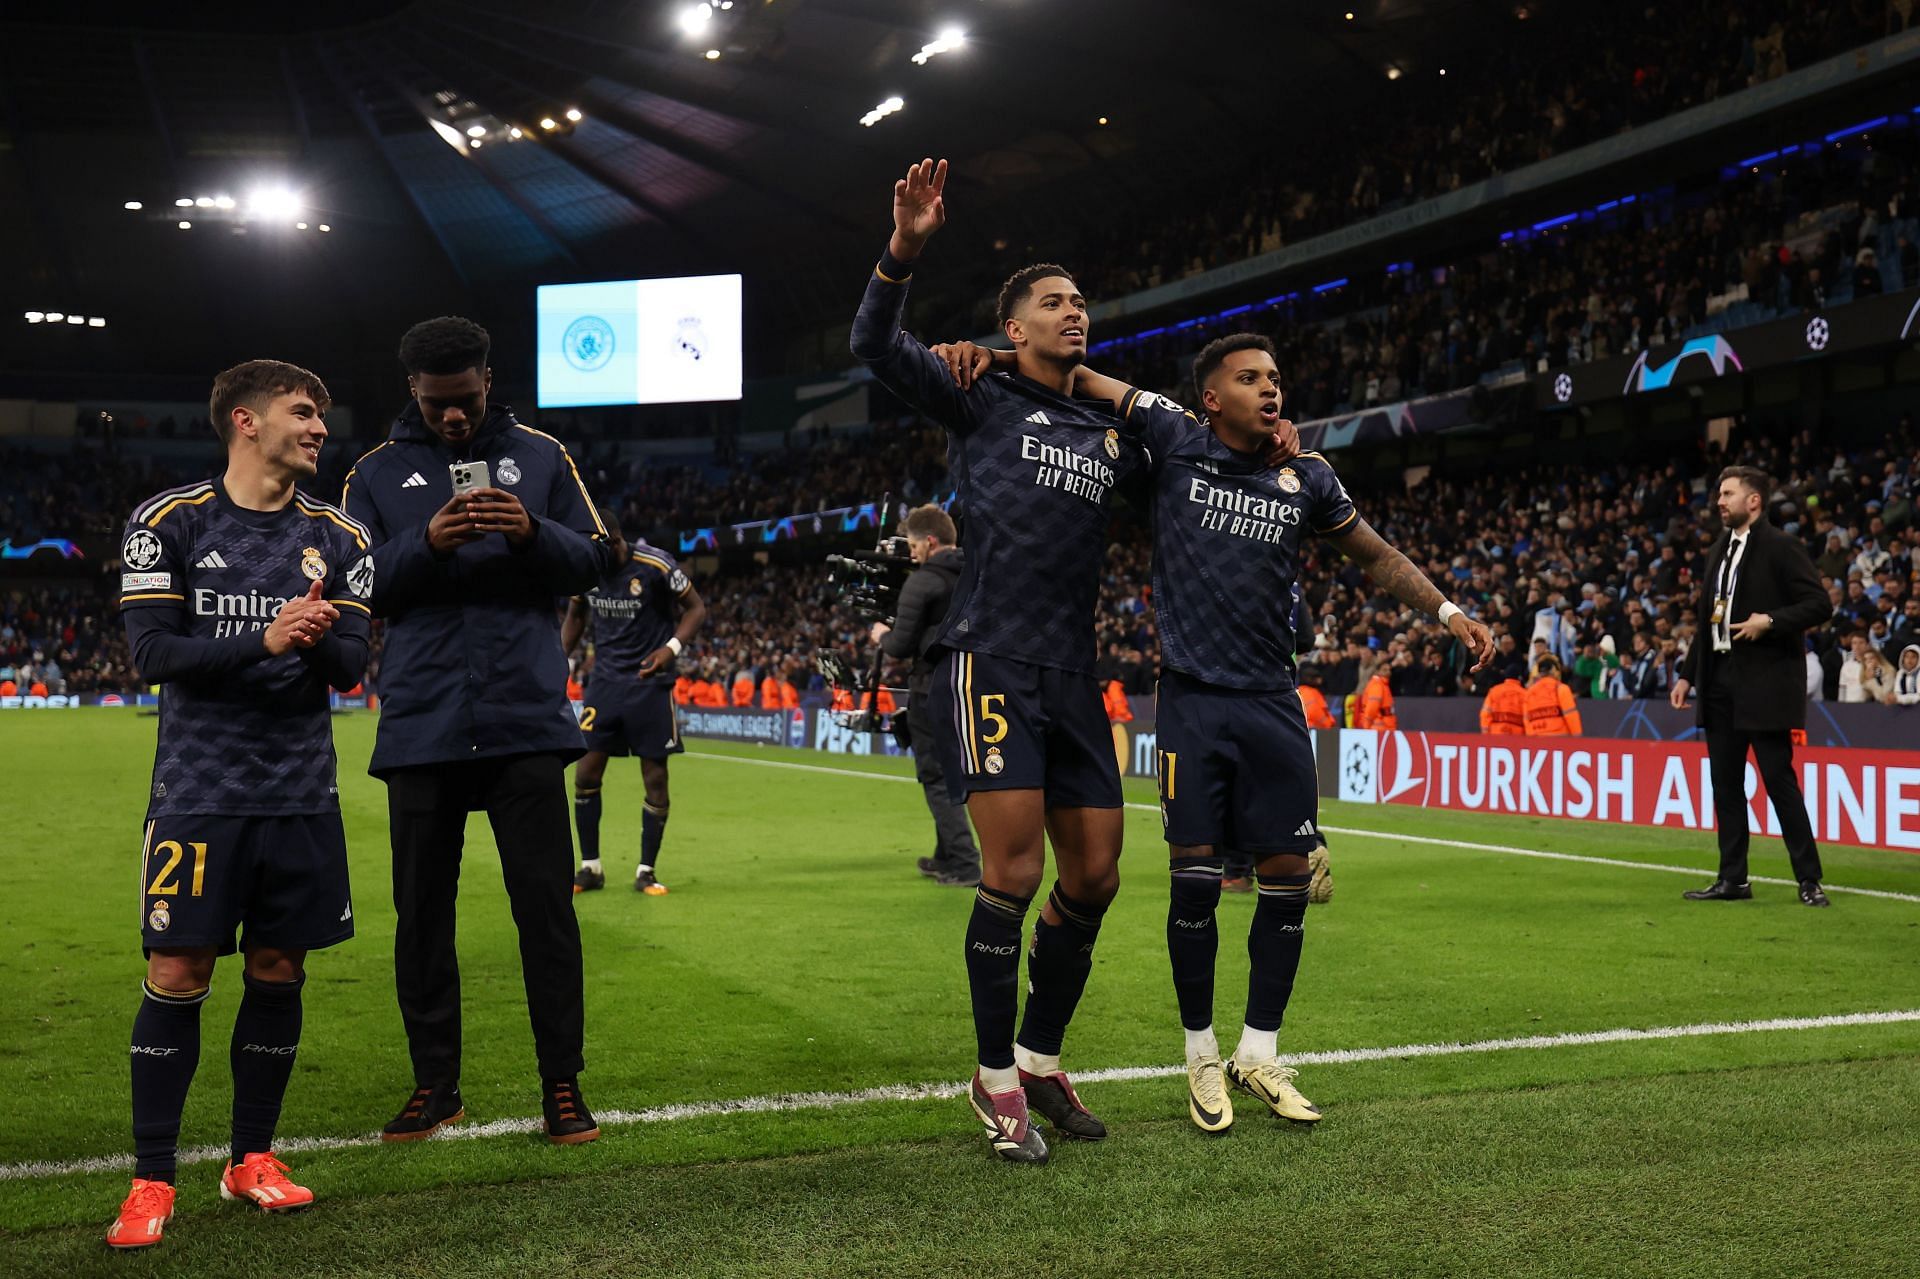 Jude Bellingham and Rodrygo were vital as Real Madrid advanced to the UCL semifinals.